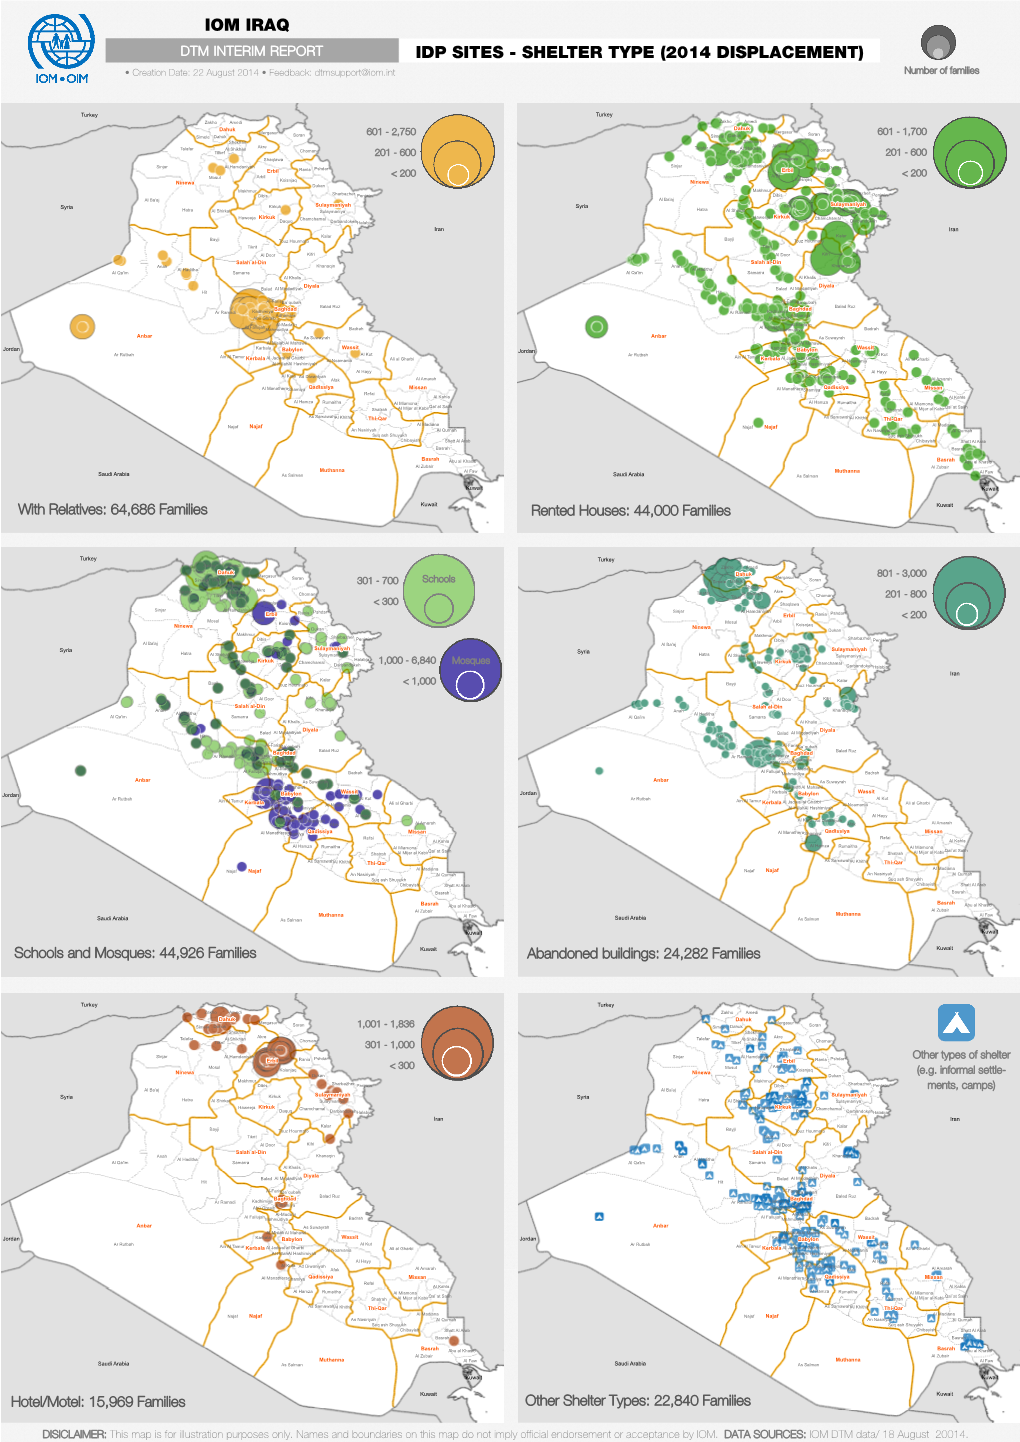 IOM IRAQ DTM INTERIM REPORT IDP SITES - SHELTER TYPE (2014 DISPLACEMENT) • Creation Date: 22 August 2014 • Feedback: Dtmsupport@Iom.Int Number of Families